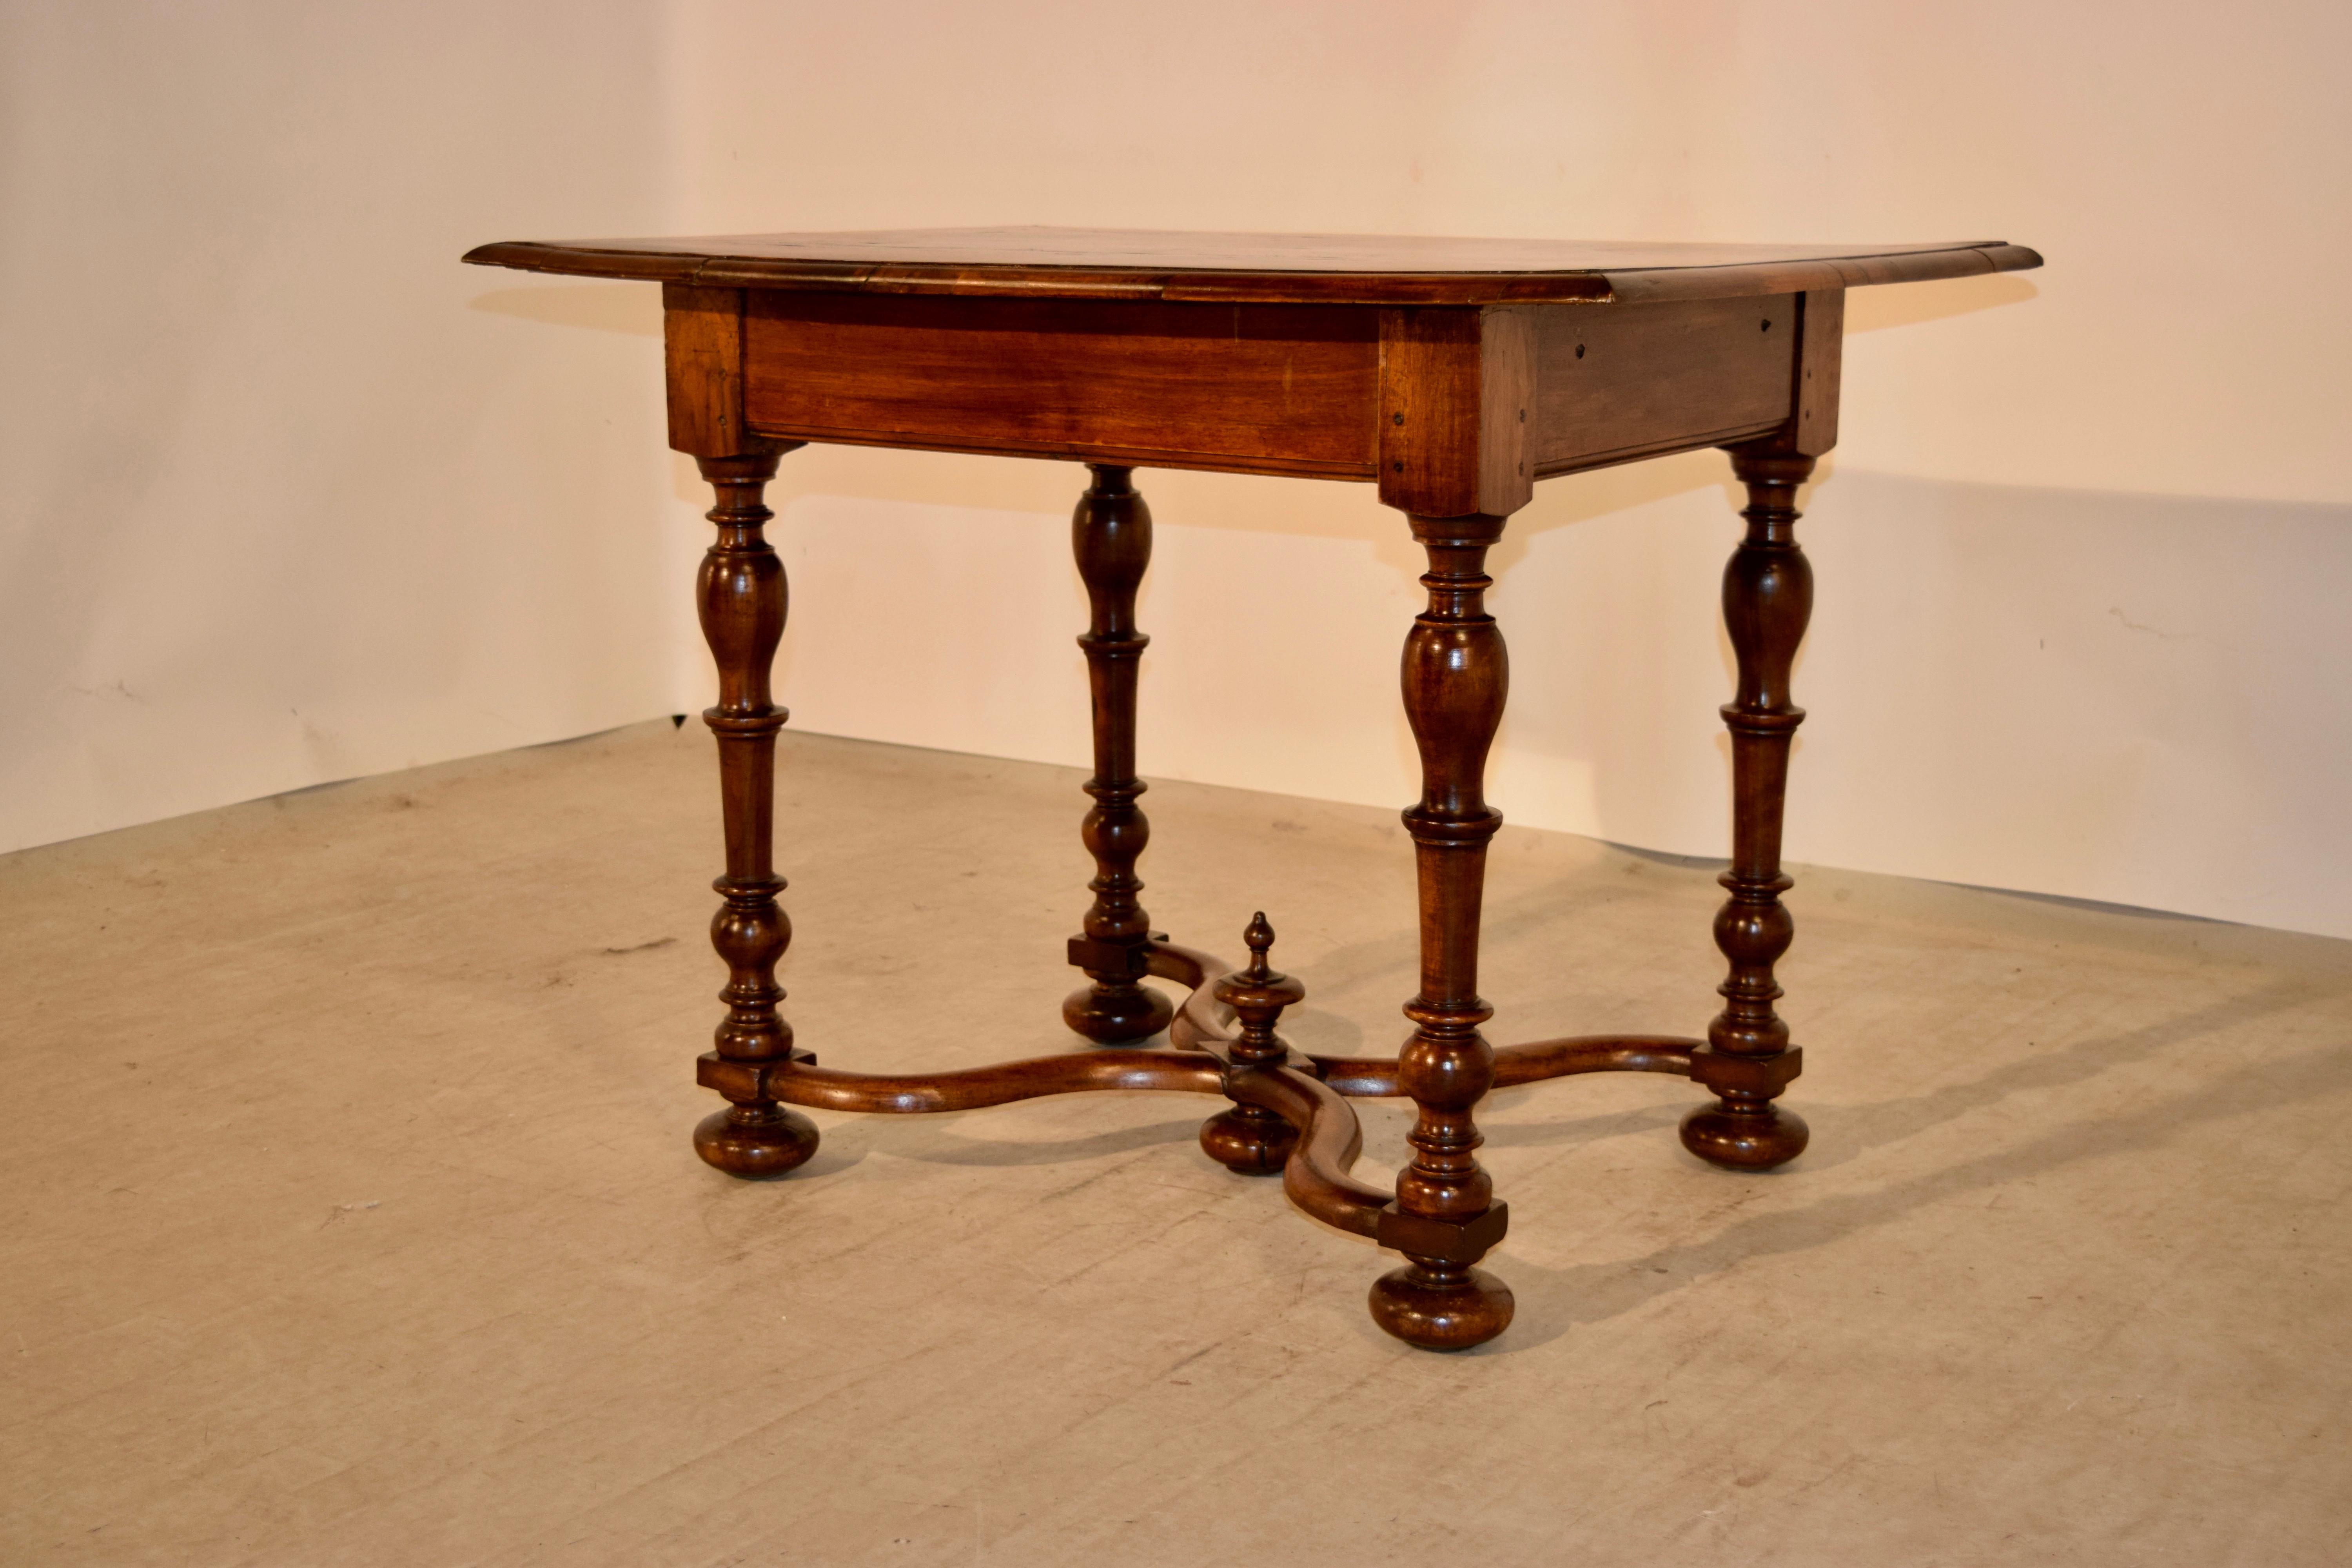 19th century French table made from walnut. The top is beautifully detailed with cross banding around the edges in a lovely pattern surrounding a central pattern with burl in a matching design. The top is finished with a beveled edge and follows